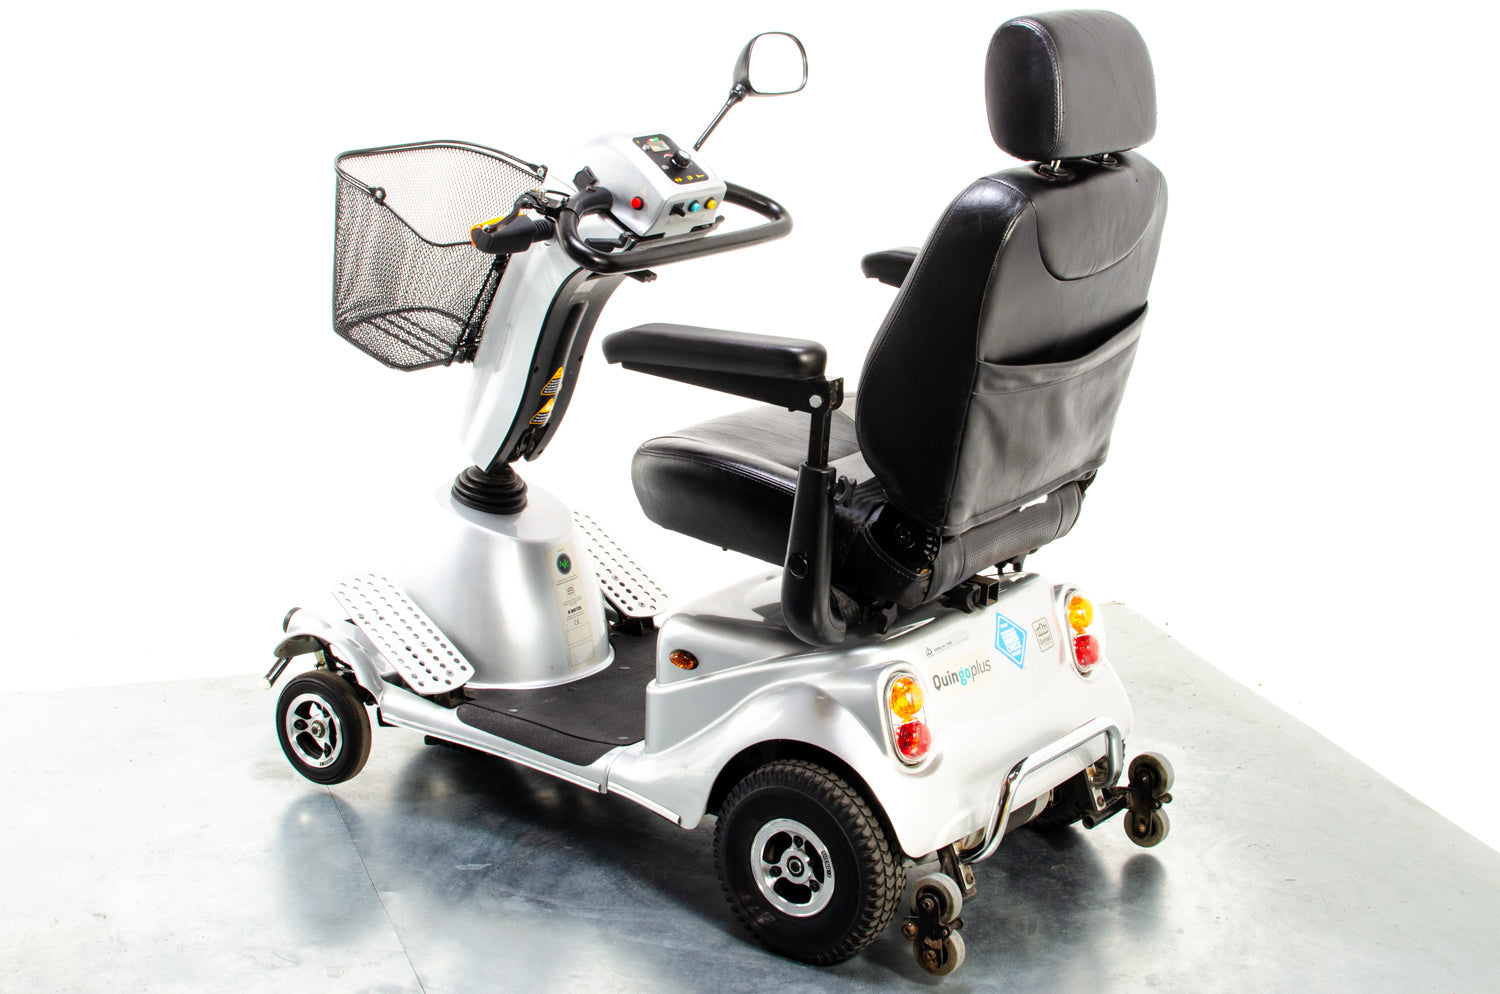 AVC Quingo Plus 8mph Used Mobility Scooter 5 Wheels Road Pavement Turning Circle